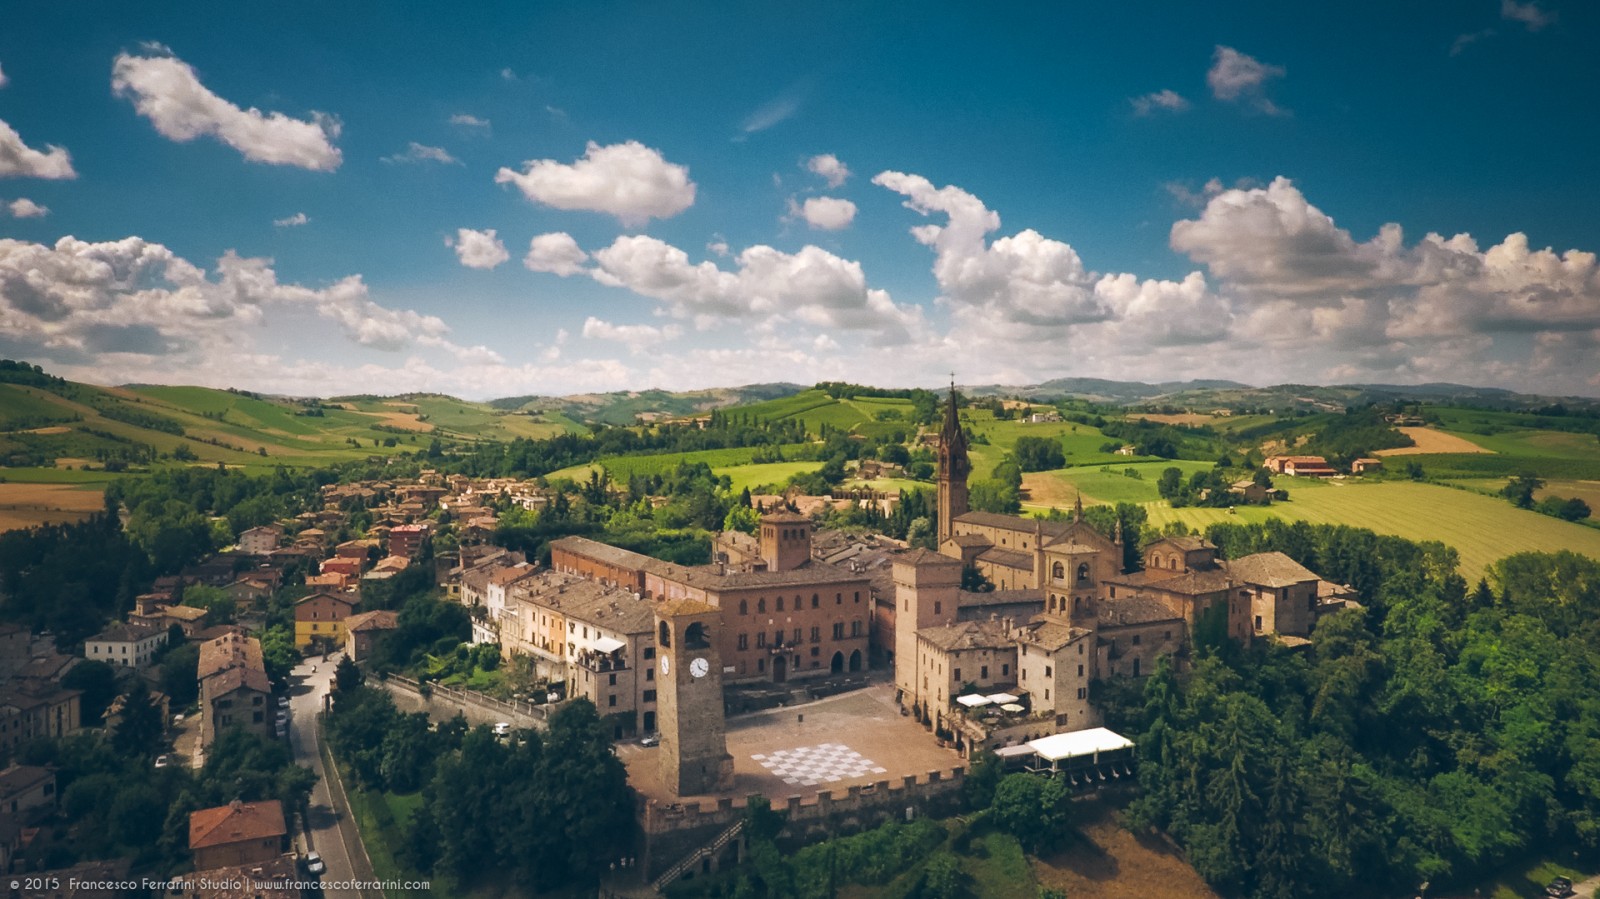 Castelvetro di Modena, from towers to vineyards